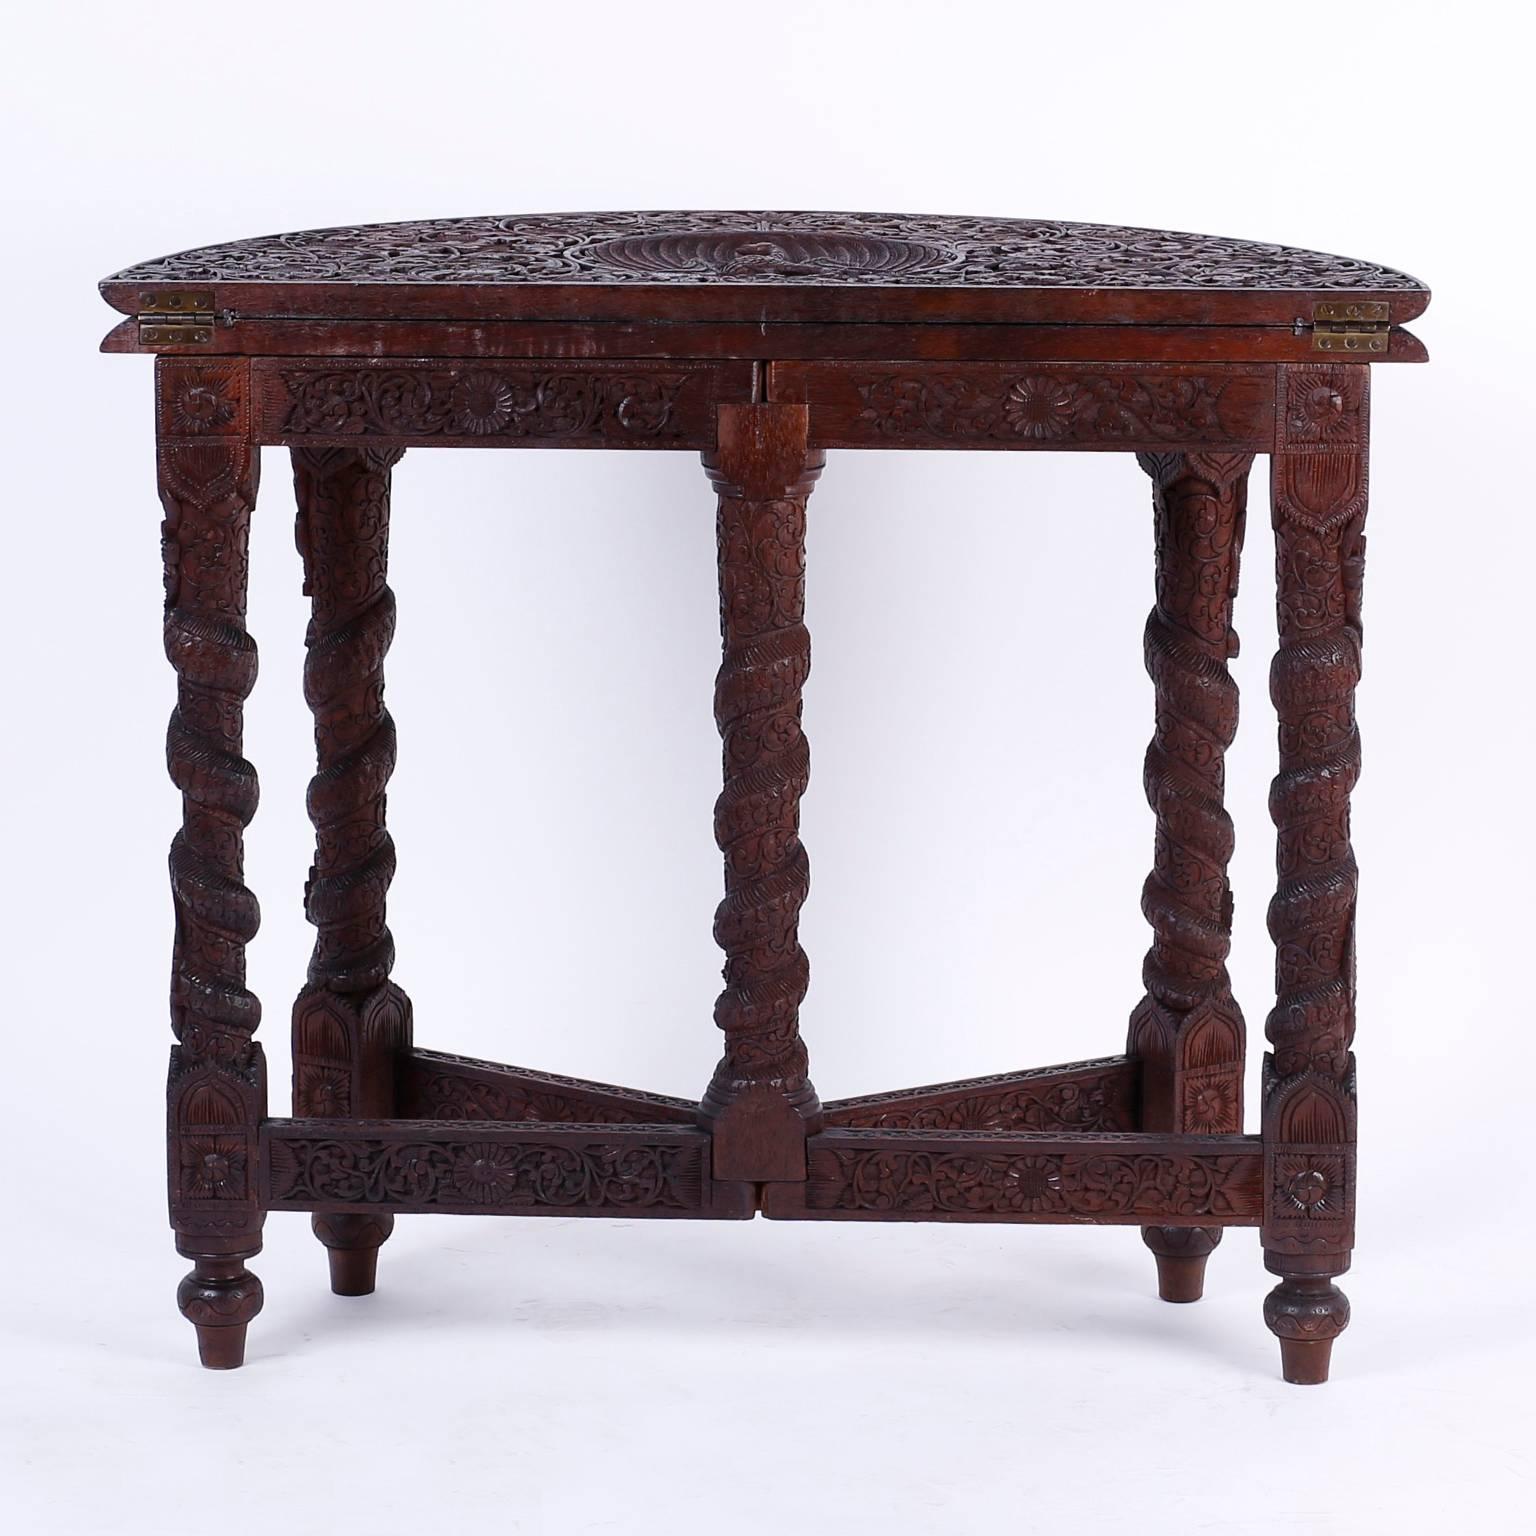 19th Century Anglo-Indian Game or Card Table